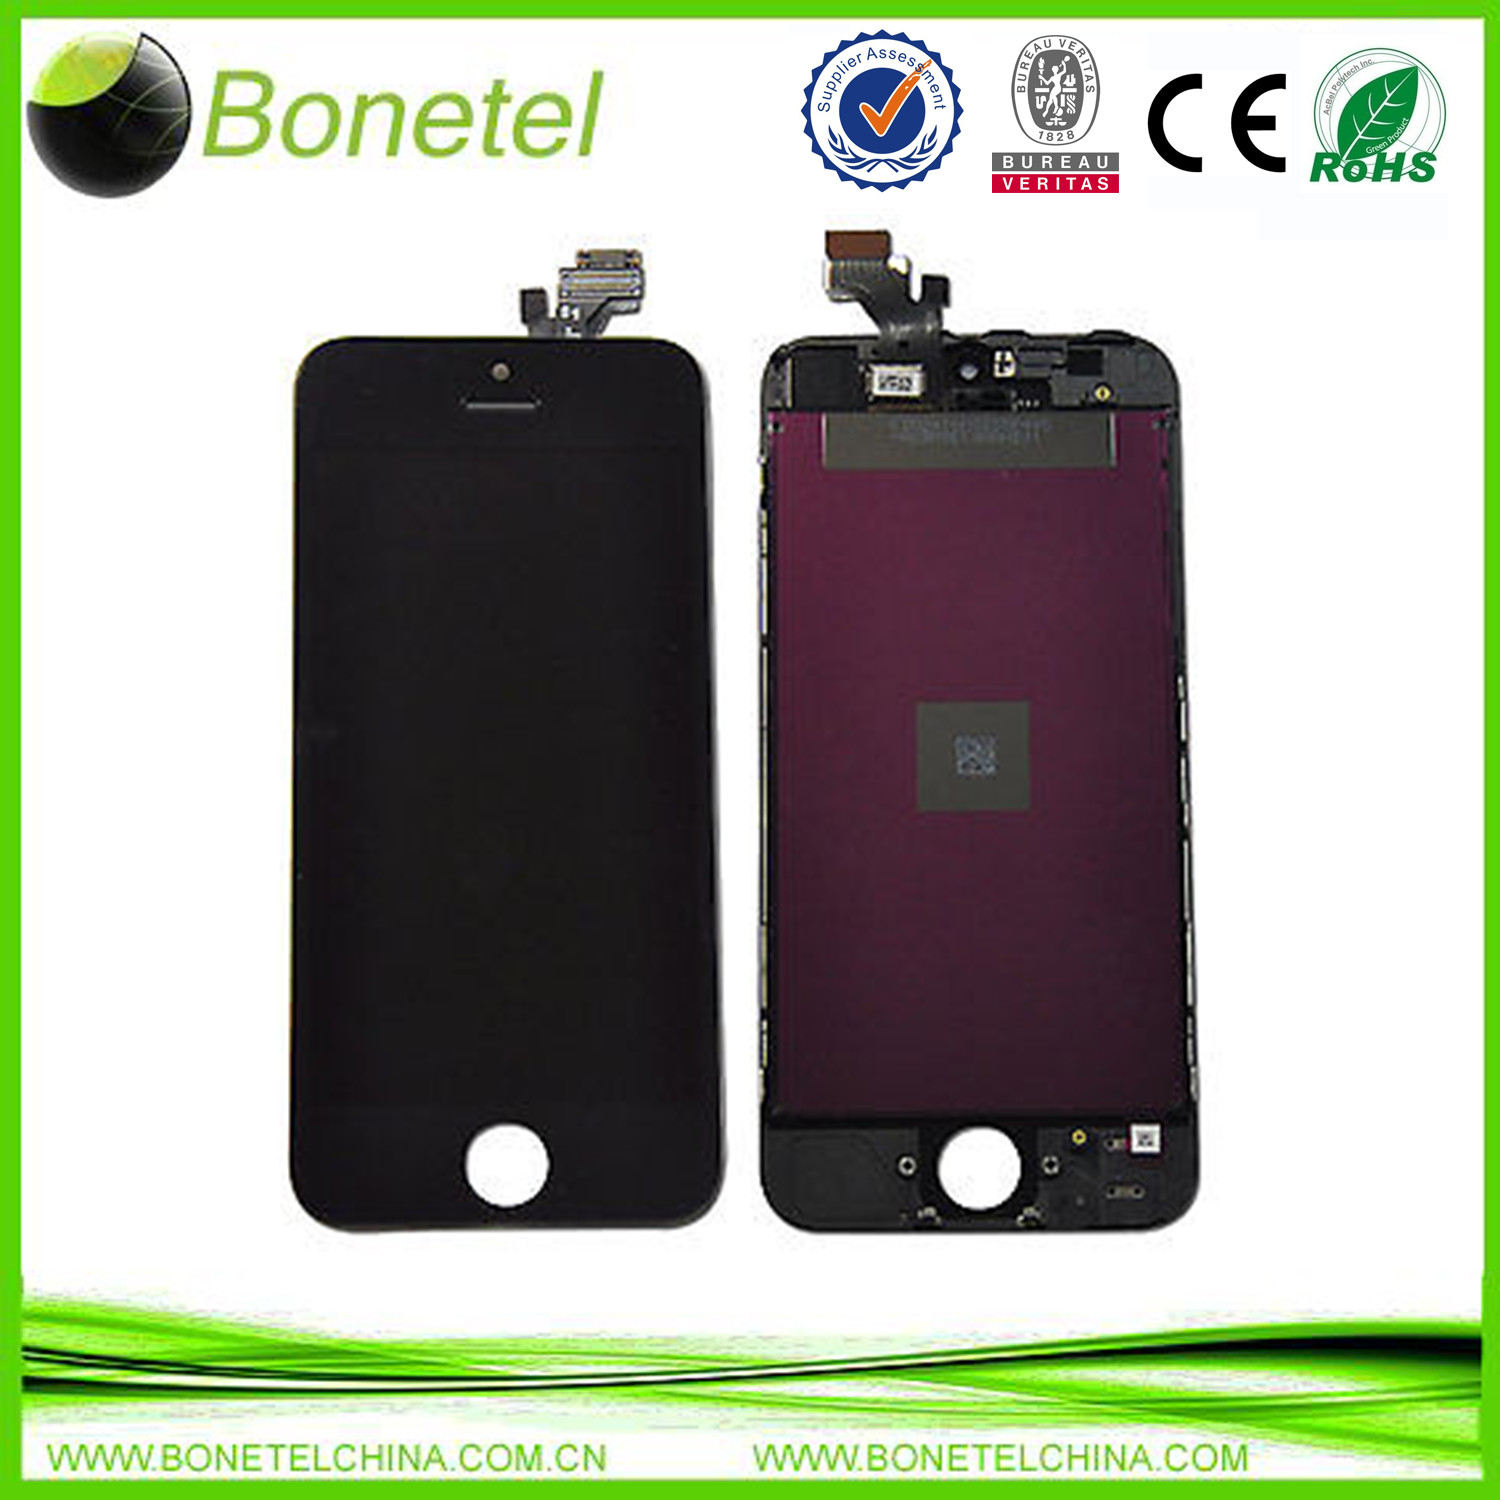 BLACK  LCD Display Touch Screen Digitizer Assembly for iPhone 5 5G